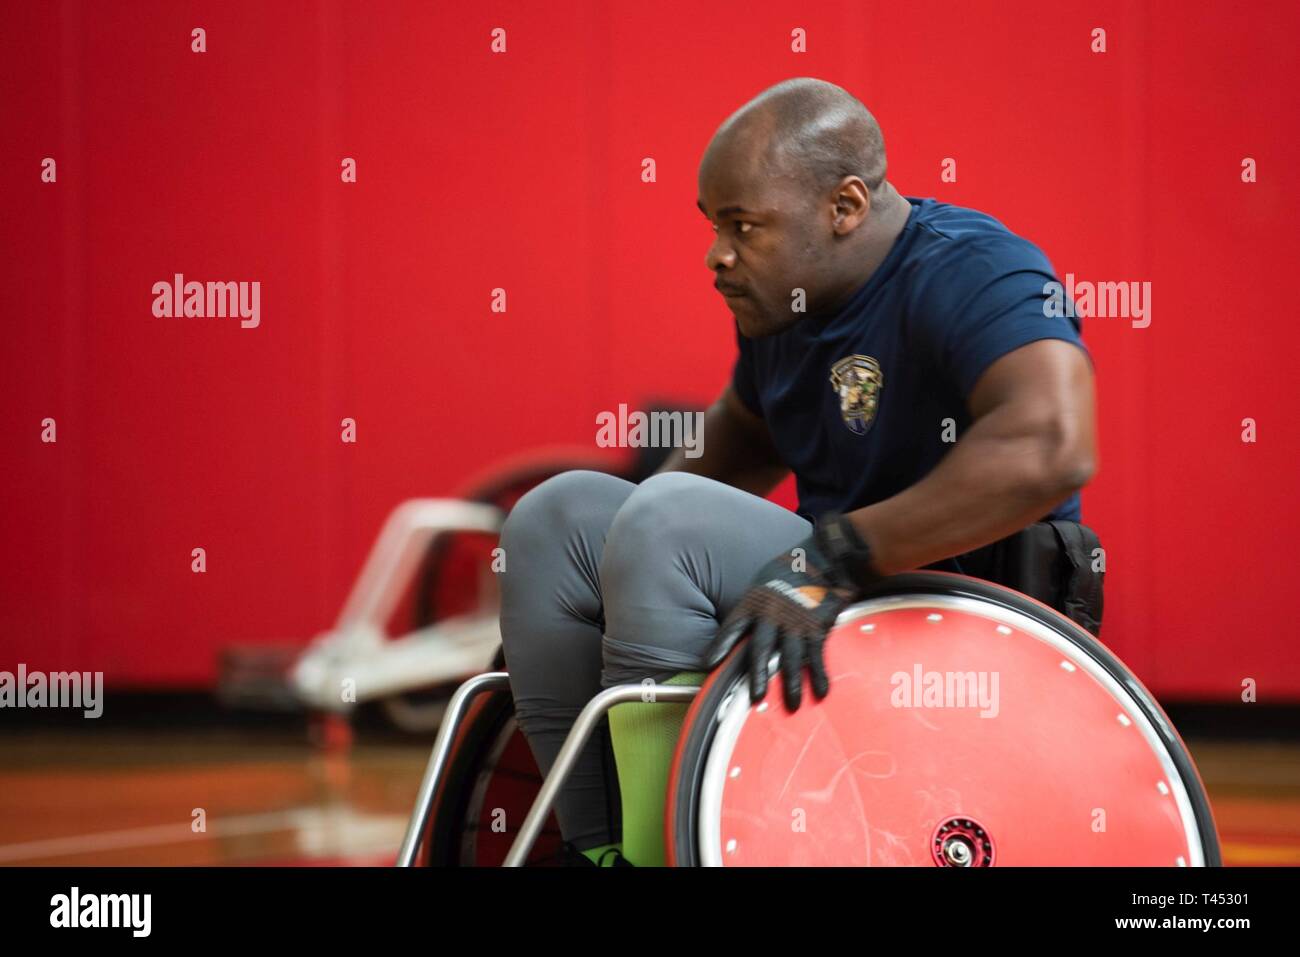 U.S. Navy Petty Officer 1st Class Sky SaintLouis participates in a drill at wheelchair rugby practice during the 2019 Marine Corps Trials at Marine Corps Base Camp Pendleton, California, Feb. 27. The Marine Corps Trials promotes rehabilitation through adaptive sports participation and serves as the primary venue to select Marine Corps participants for the DoD Warrior Games. (Official U.S. Marine Corps Stock Photo